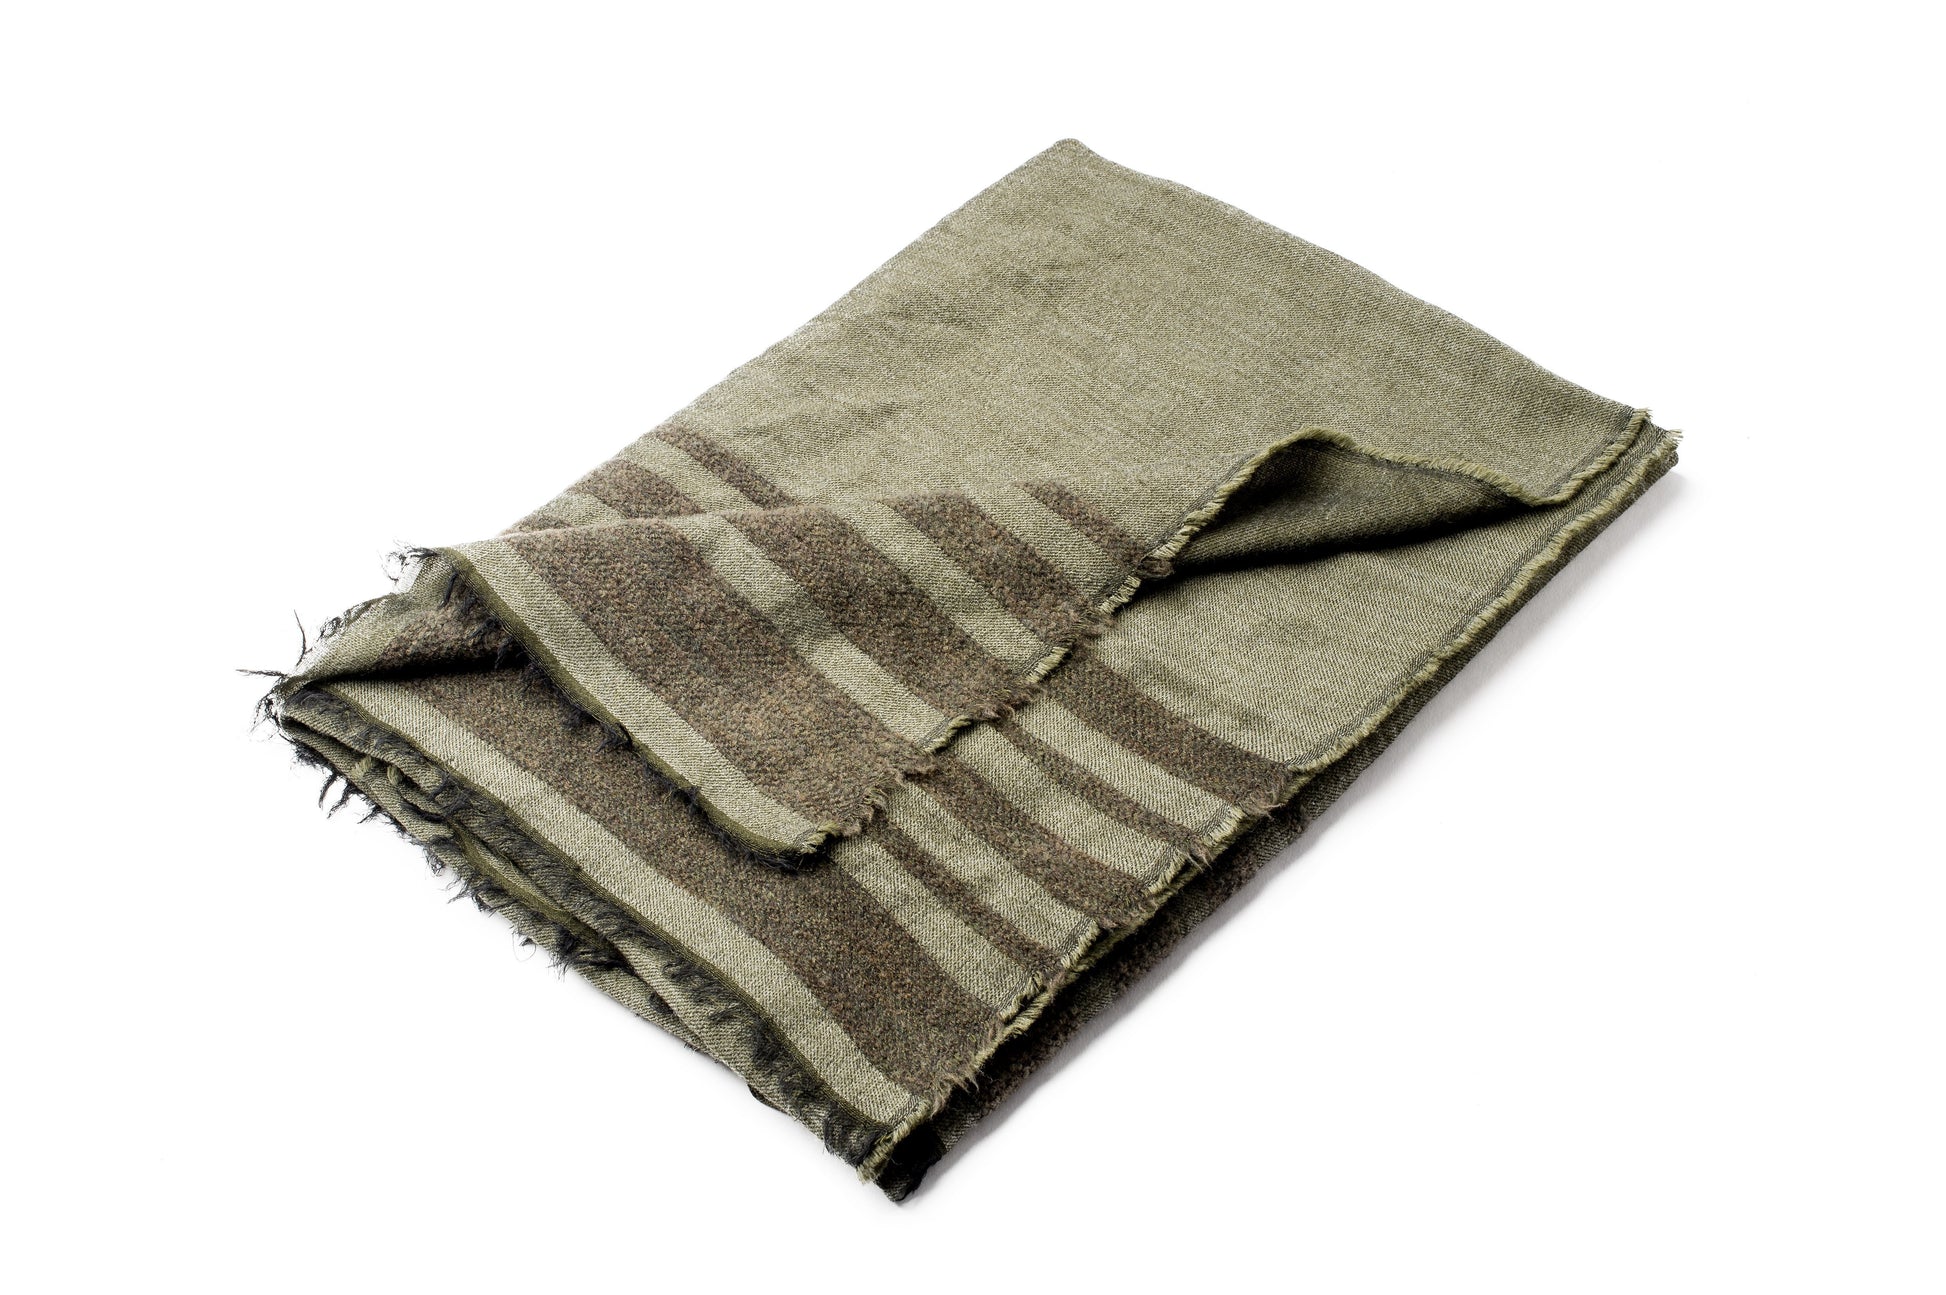 Woven scarf with contrasting chenille stripes and fringe finish on ends in Cypress